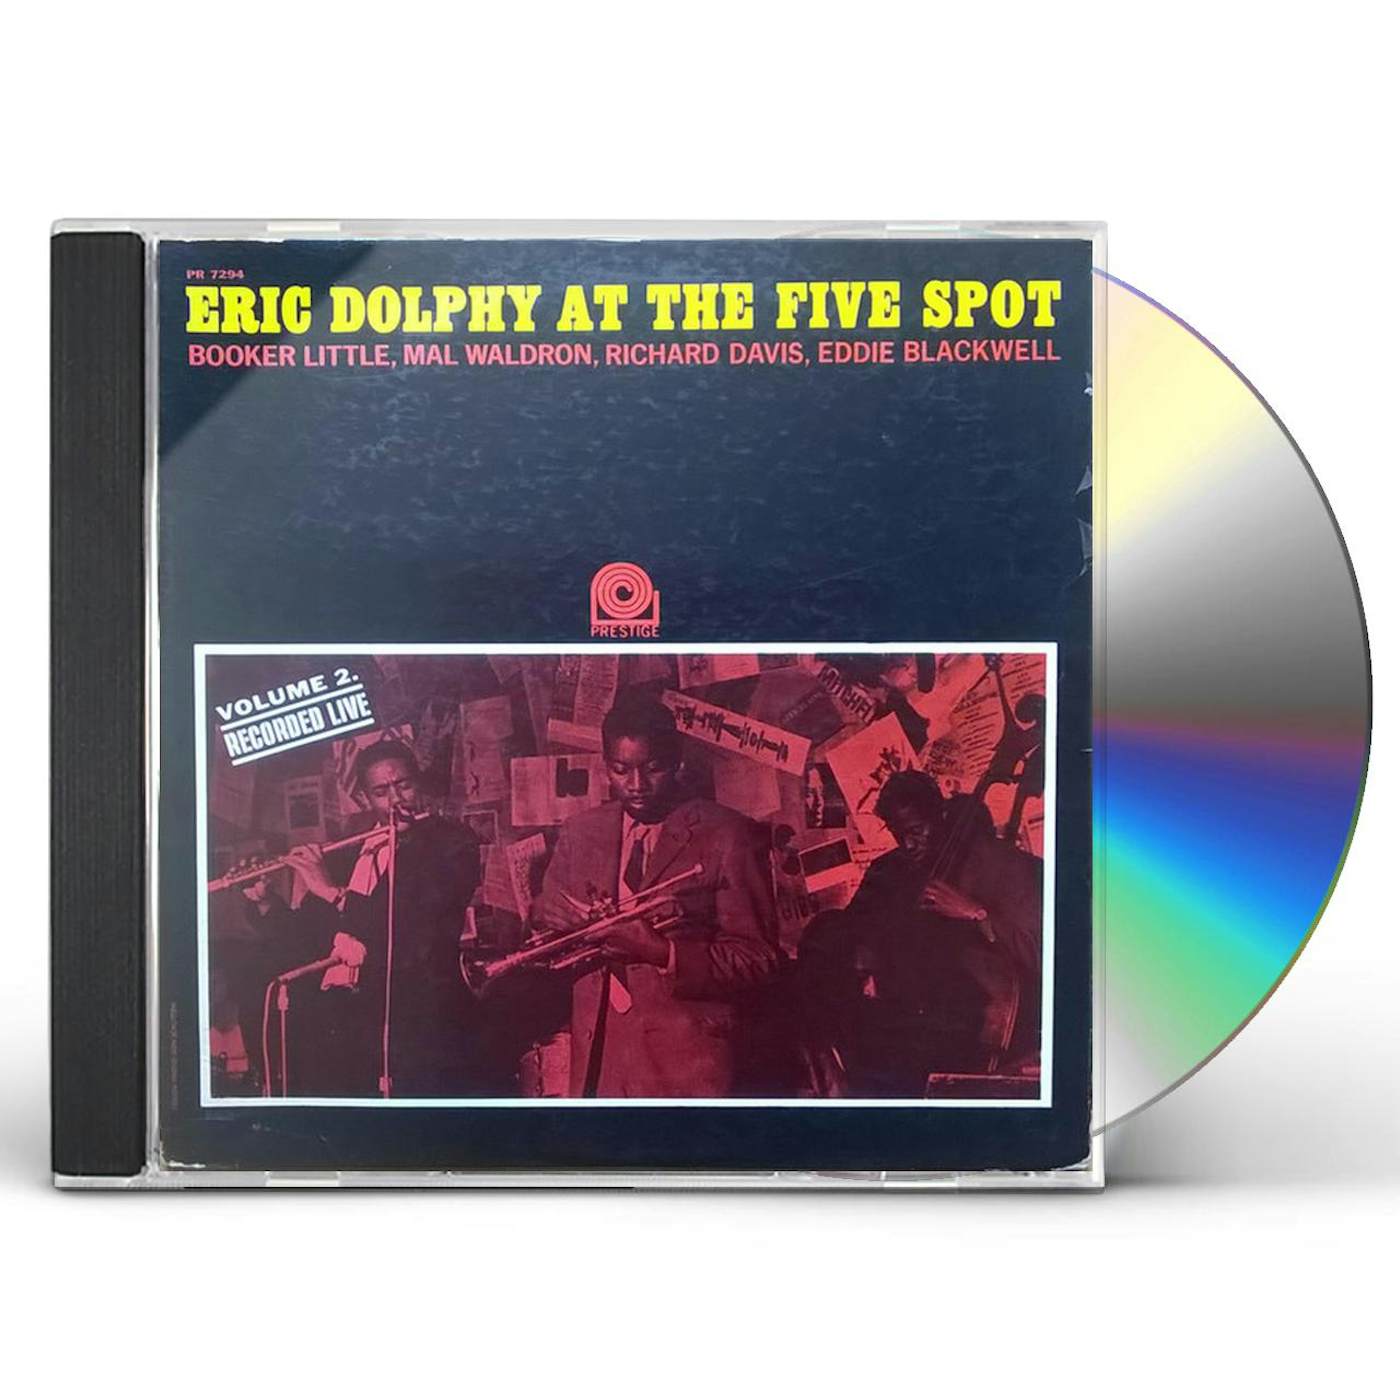 ERIC DOLPHY AT THE FIVE SPOT VOL 2 CD